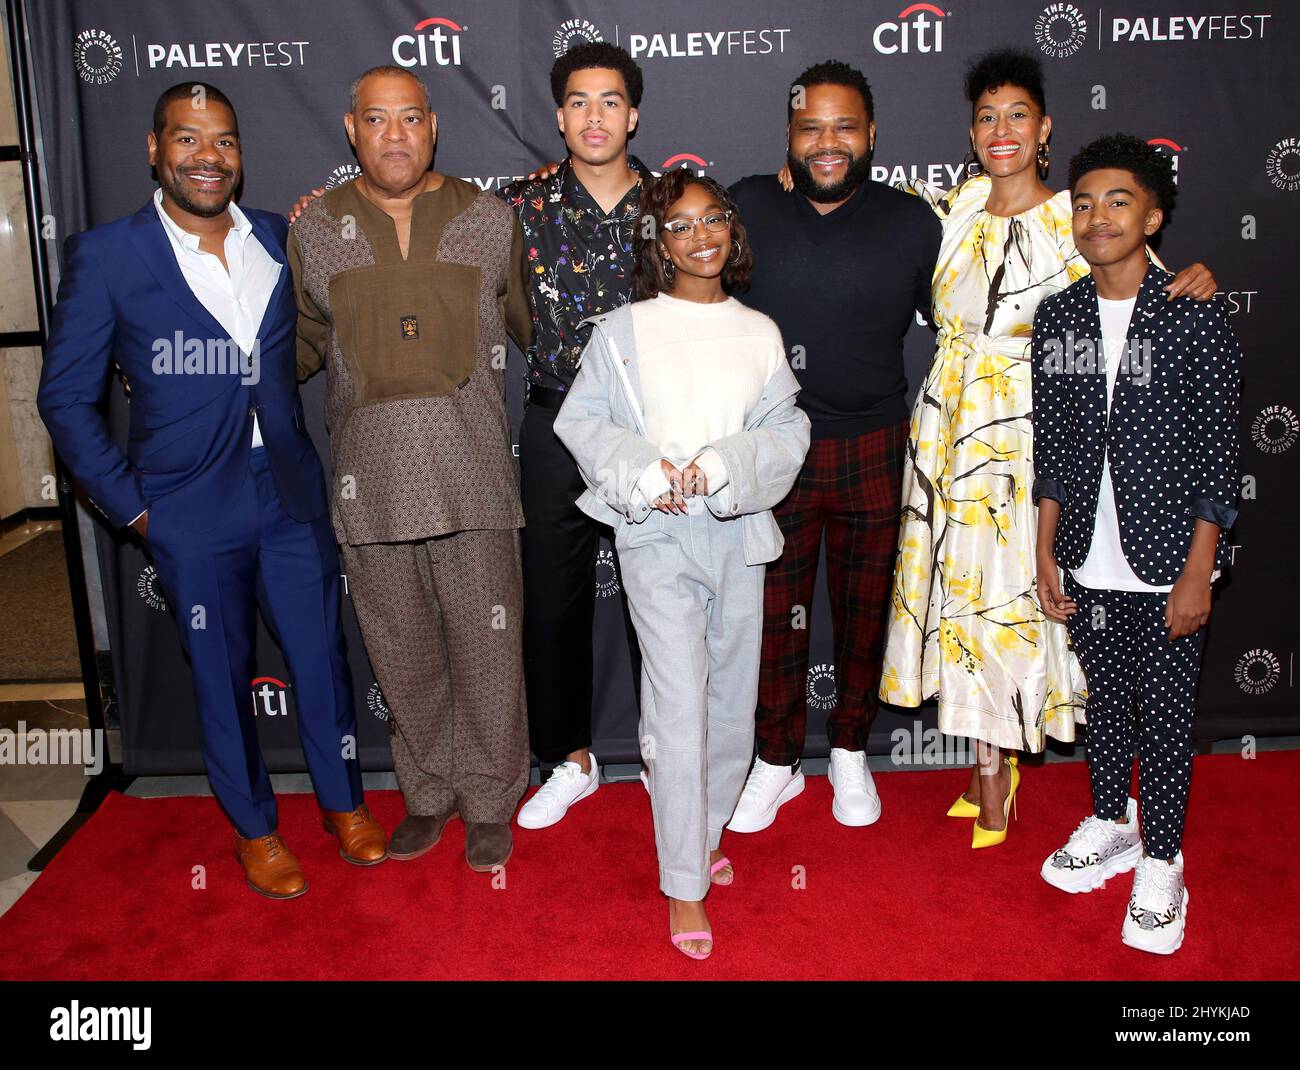 Courtney Lilly, Laurence Fishburne, Marcus Scribner, Marsai Martin, Anthony Anderson, Tracee Ellis Ross & Miles Brown beim PaleyFest NY: Black-ish am 13. Oktober 2019 im Paley Center for Media in New York City, New York. Stockfoto